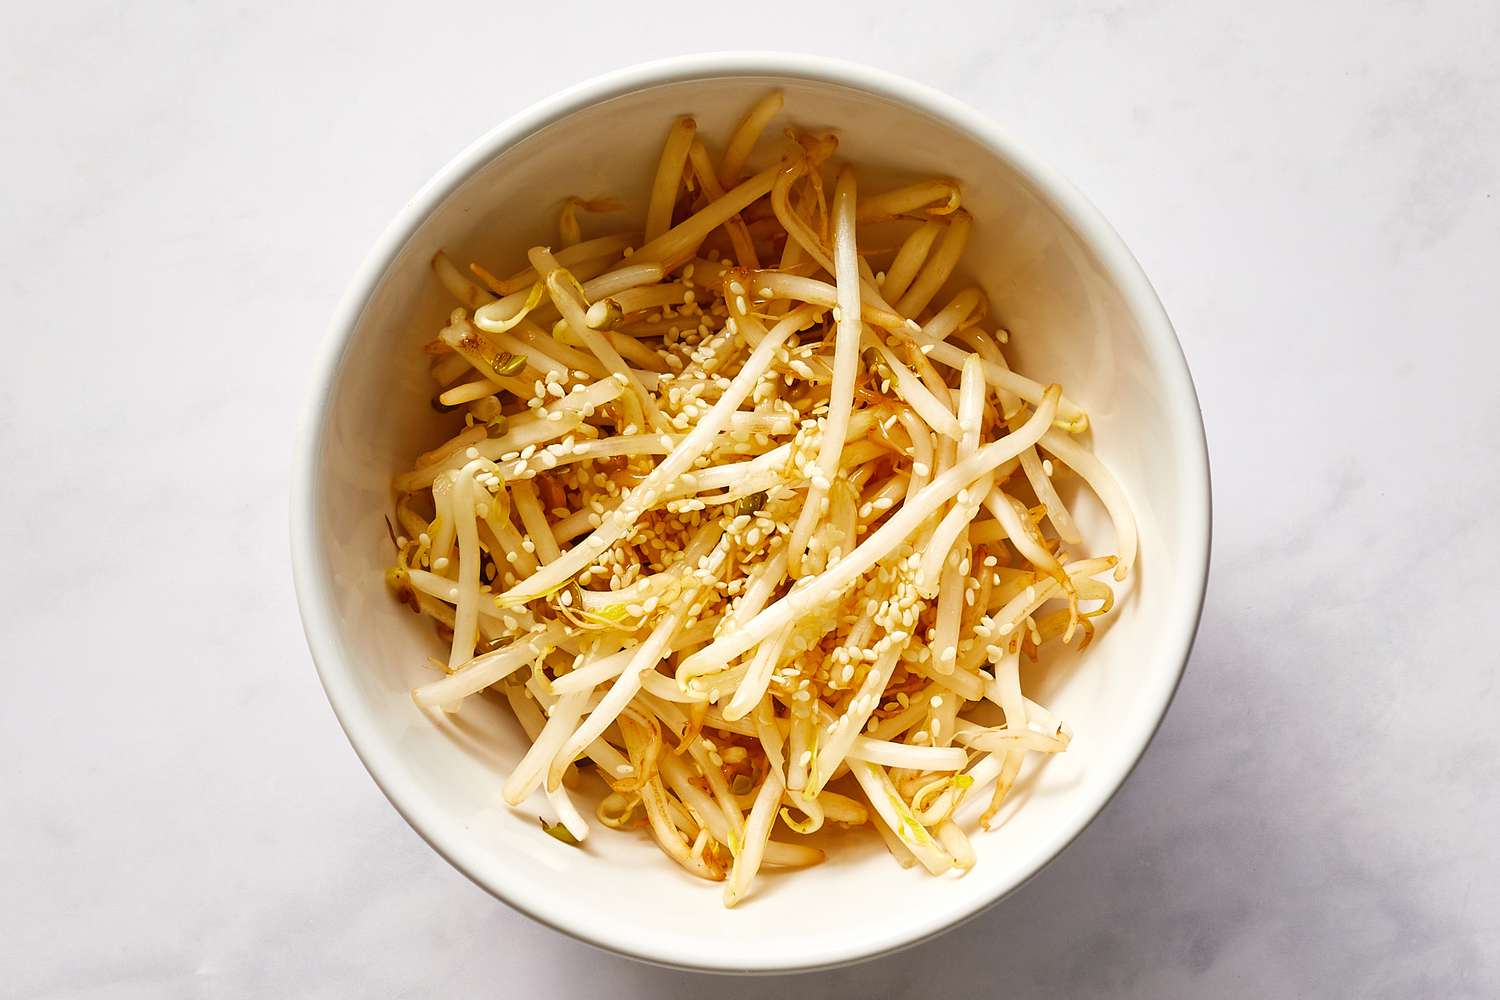 Season bean sprouts with sesame oil, salt, and a dash of sesame seeds